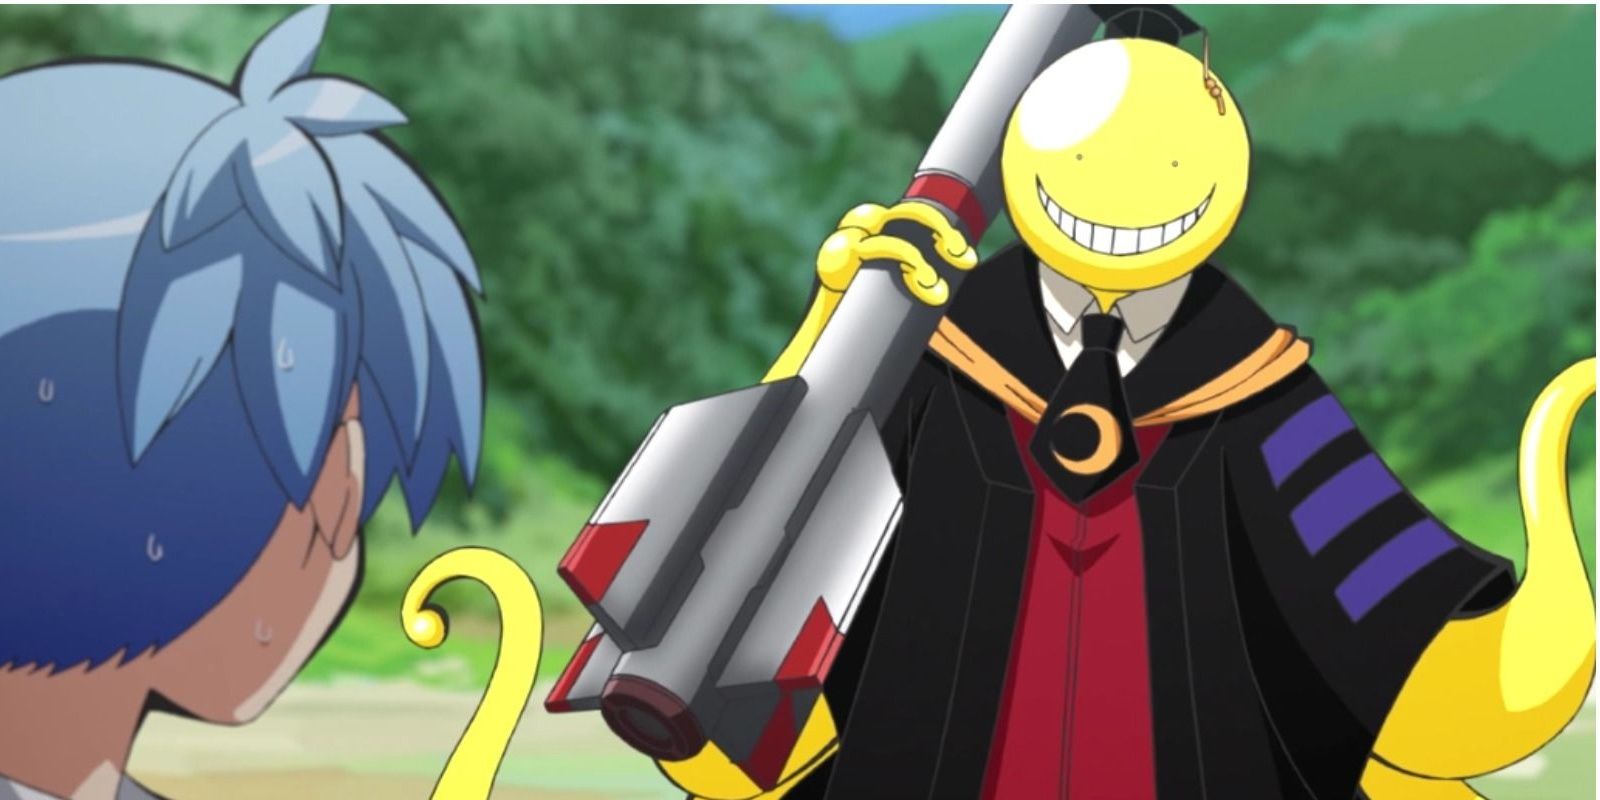 Koro Sensei Carrying A Missile In Assassination Classroom Anime